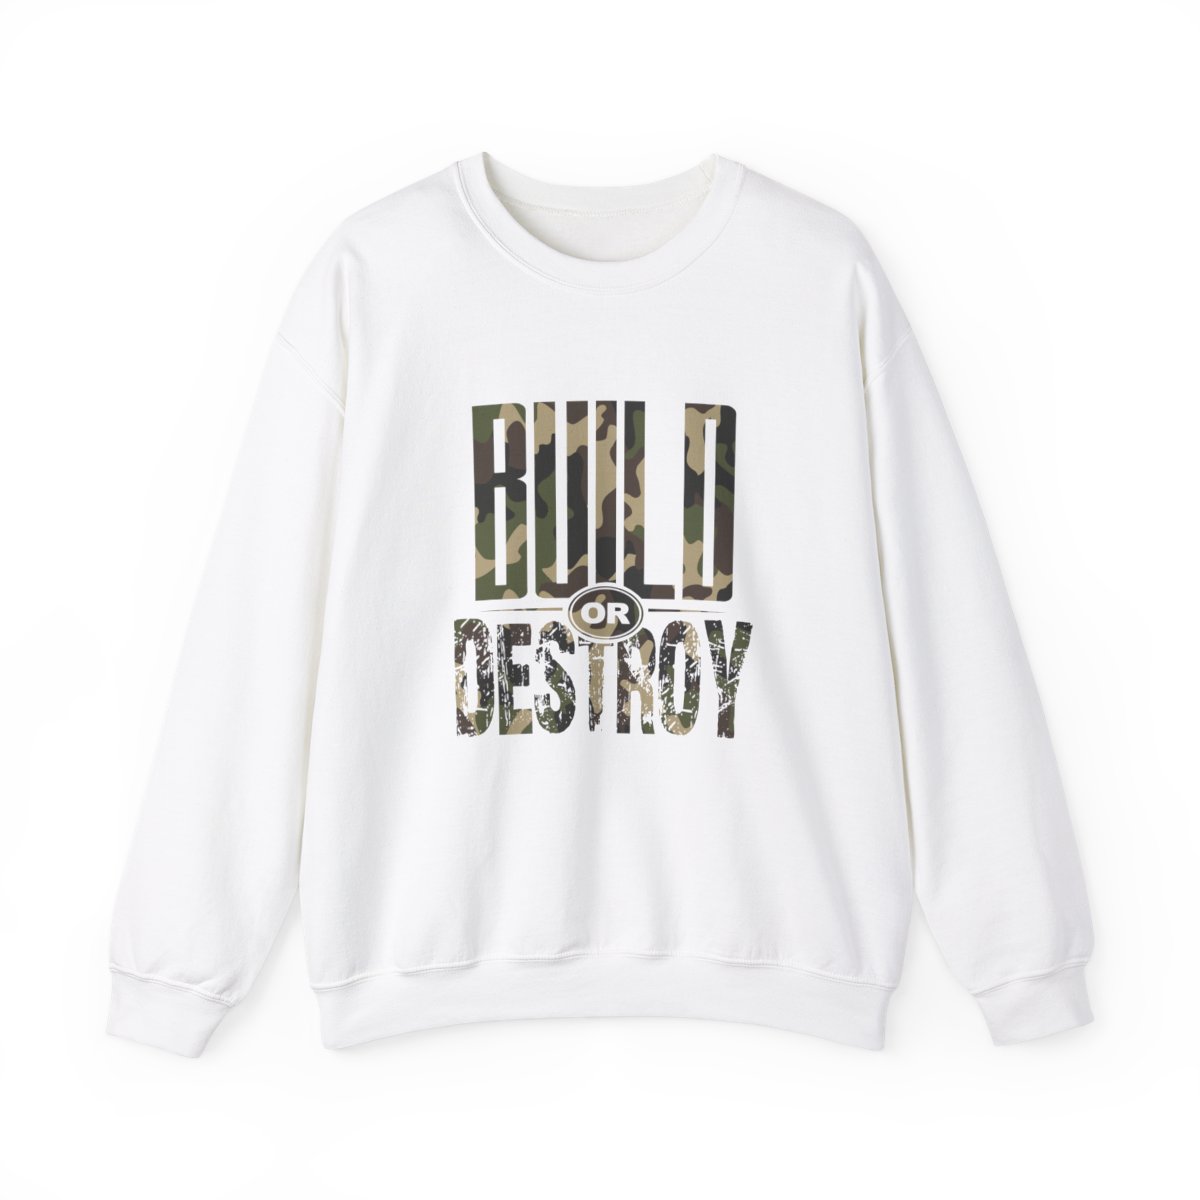 A white sweatshirt with the words hold on destroy written in black.